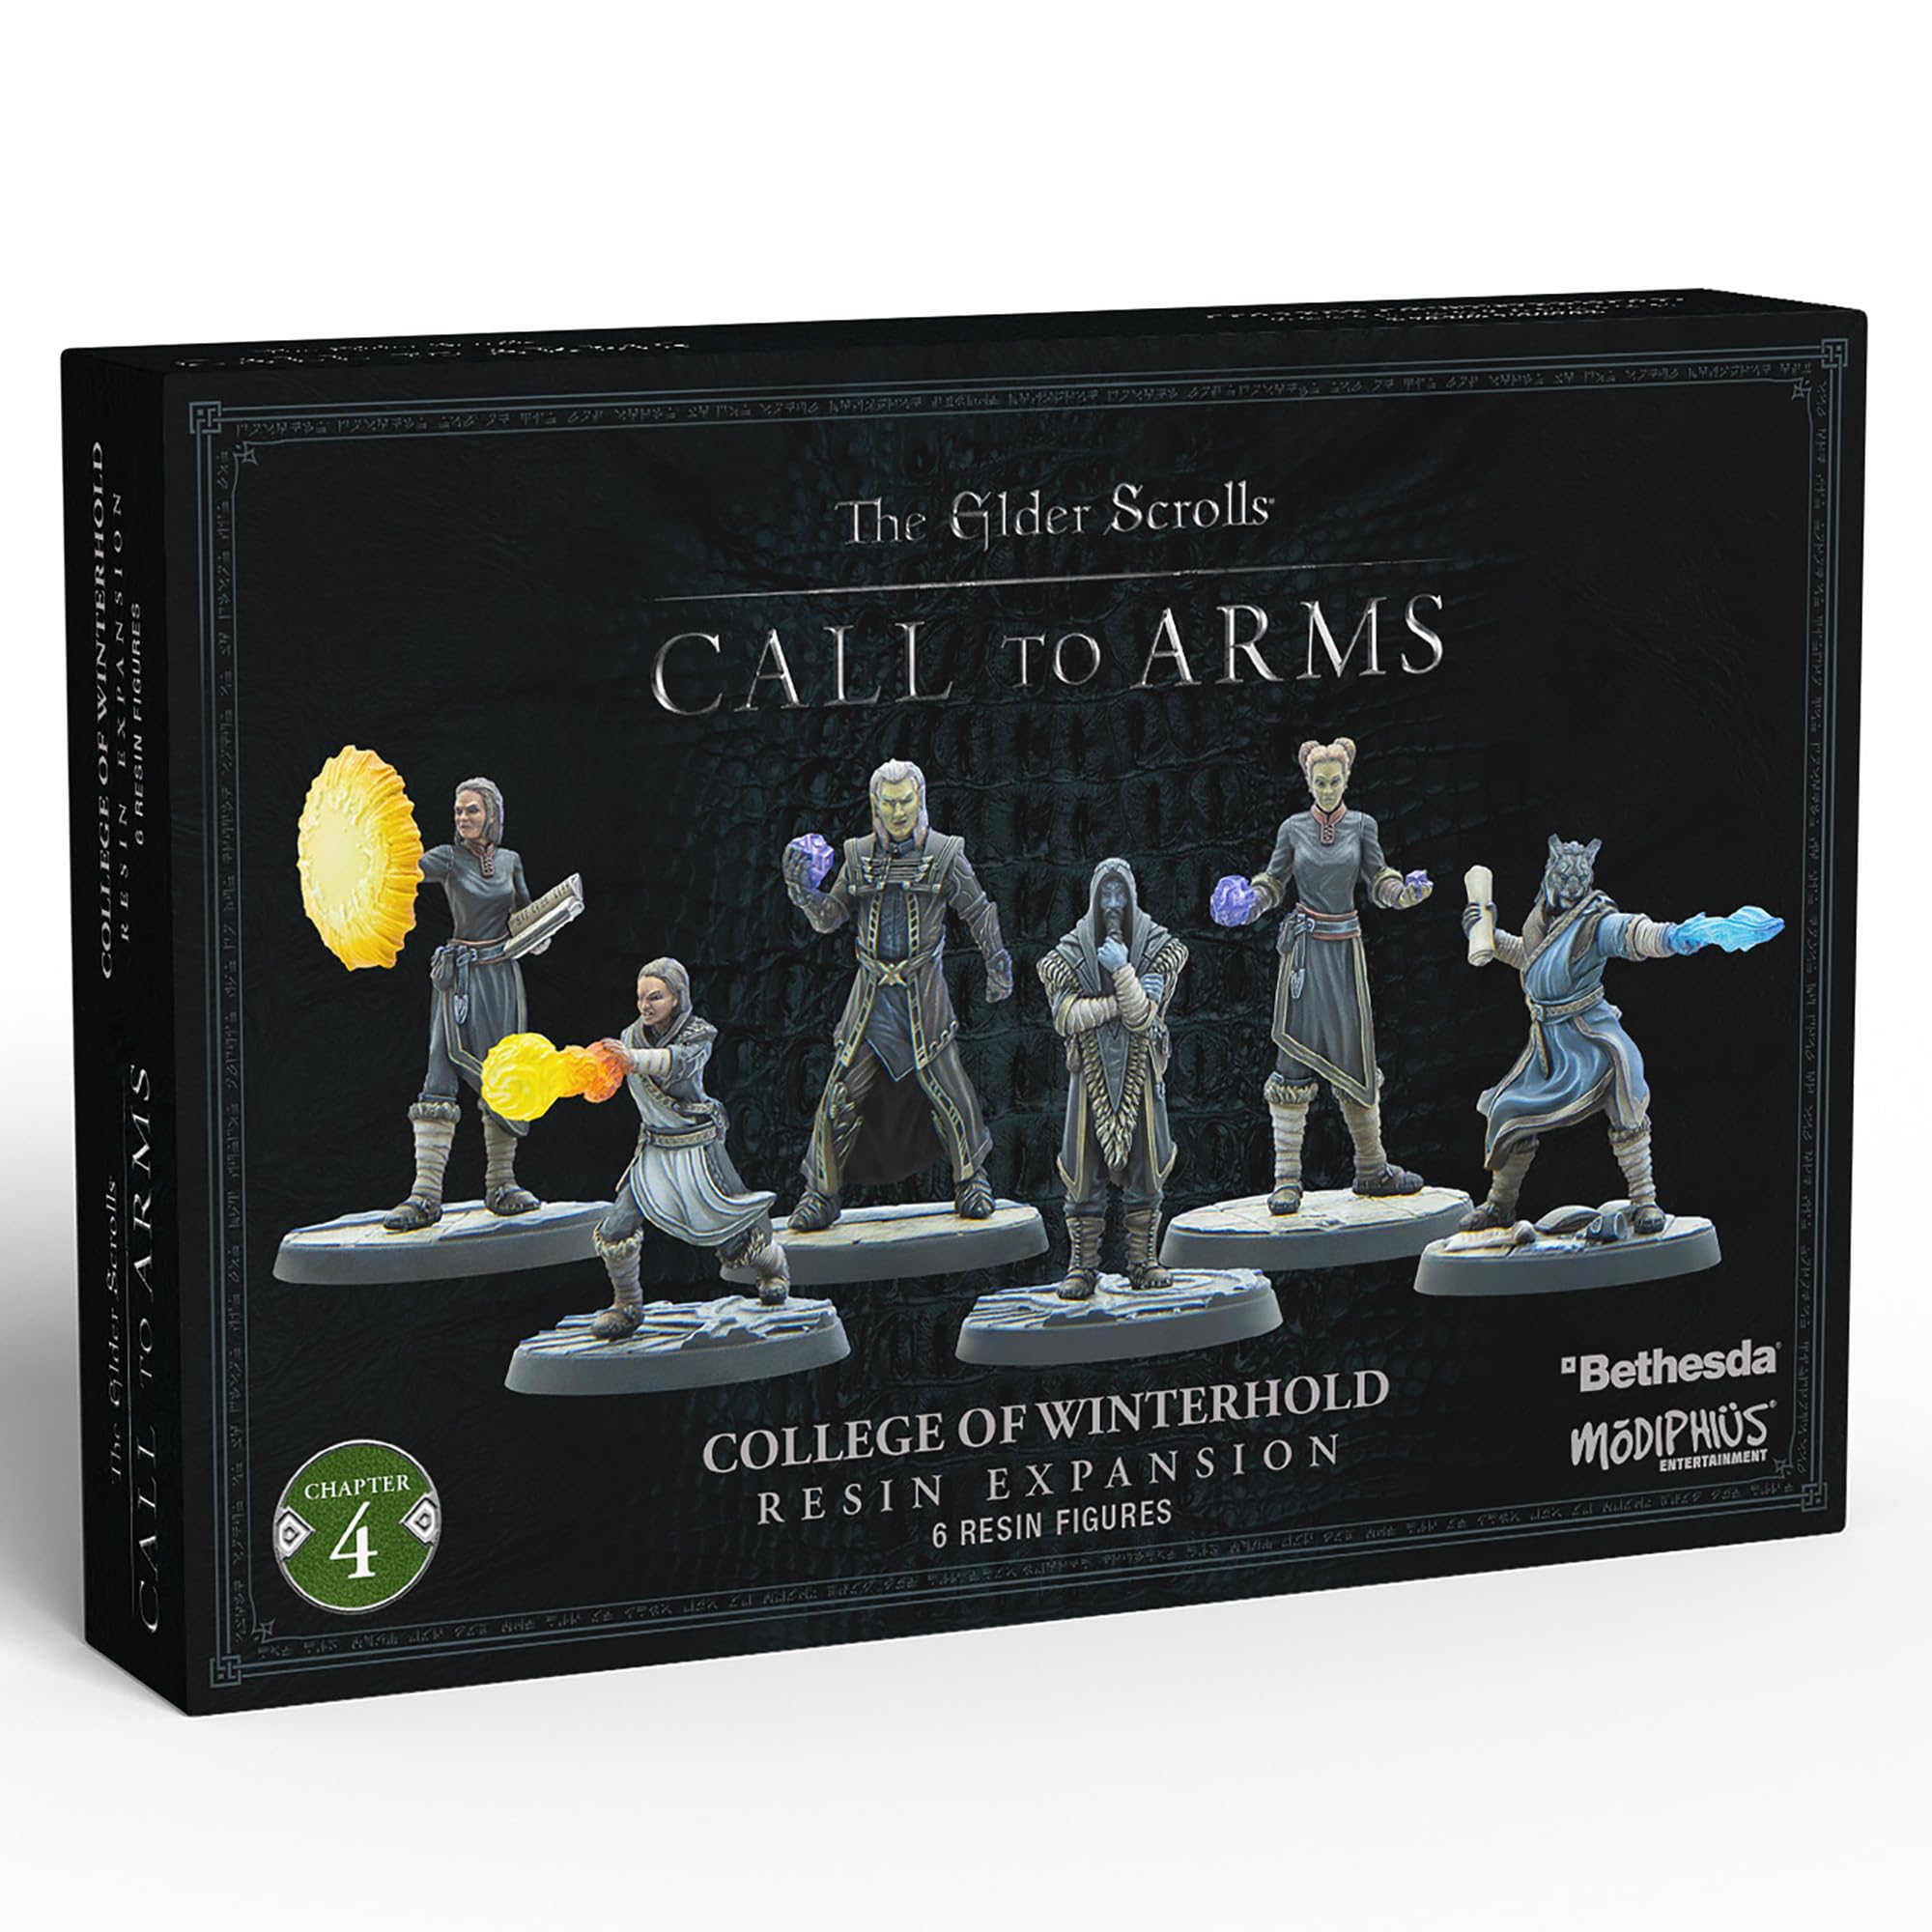 The Elder Scrolls: Call To Arms - College of Winterhold